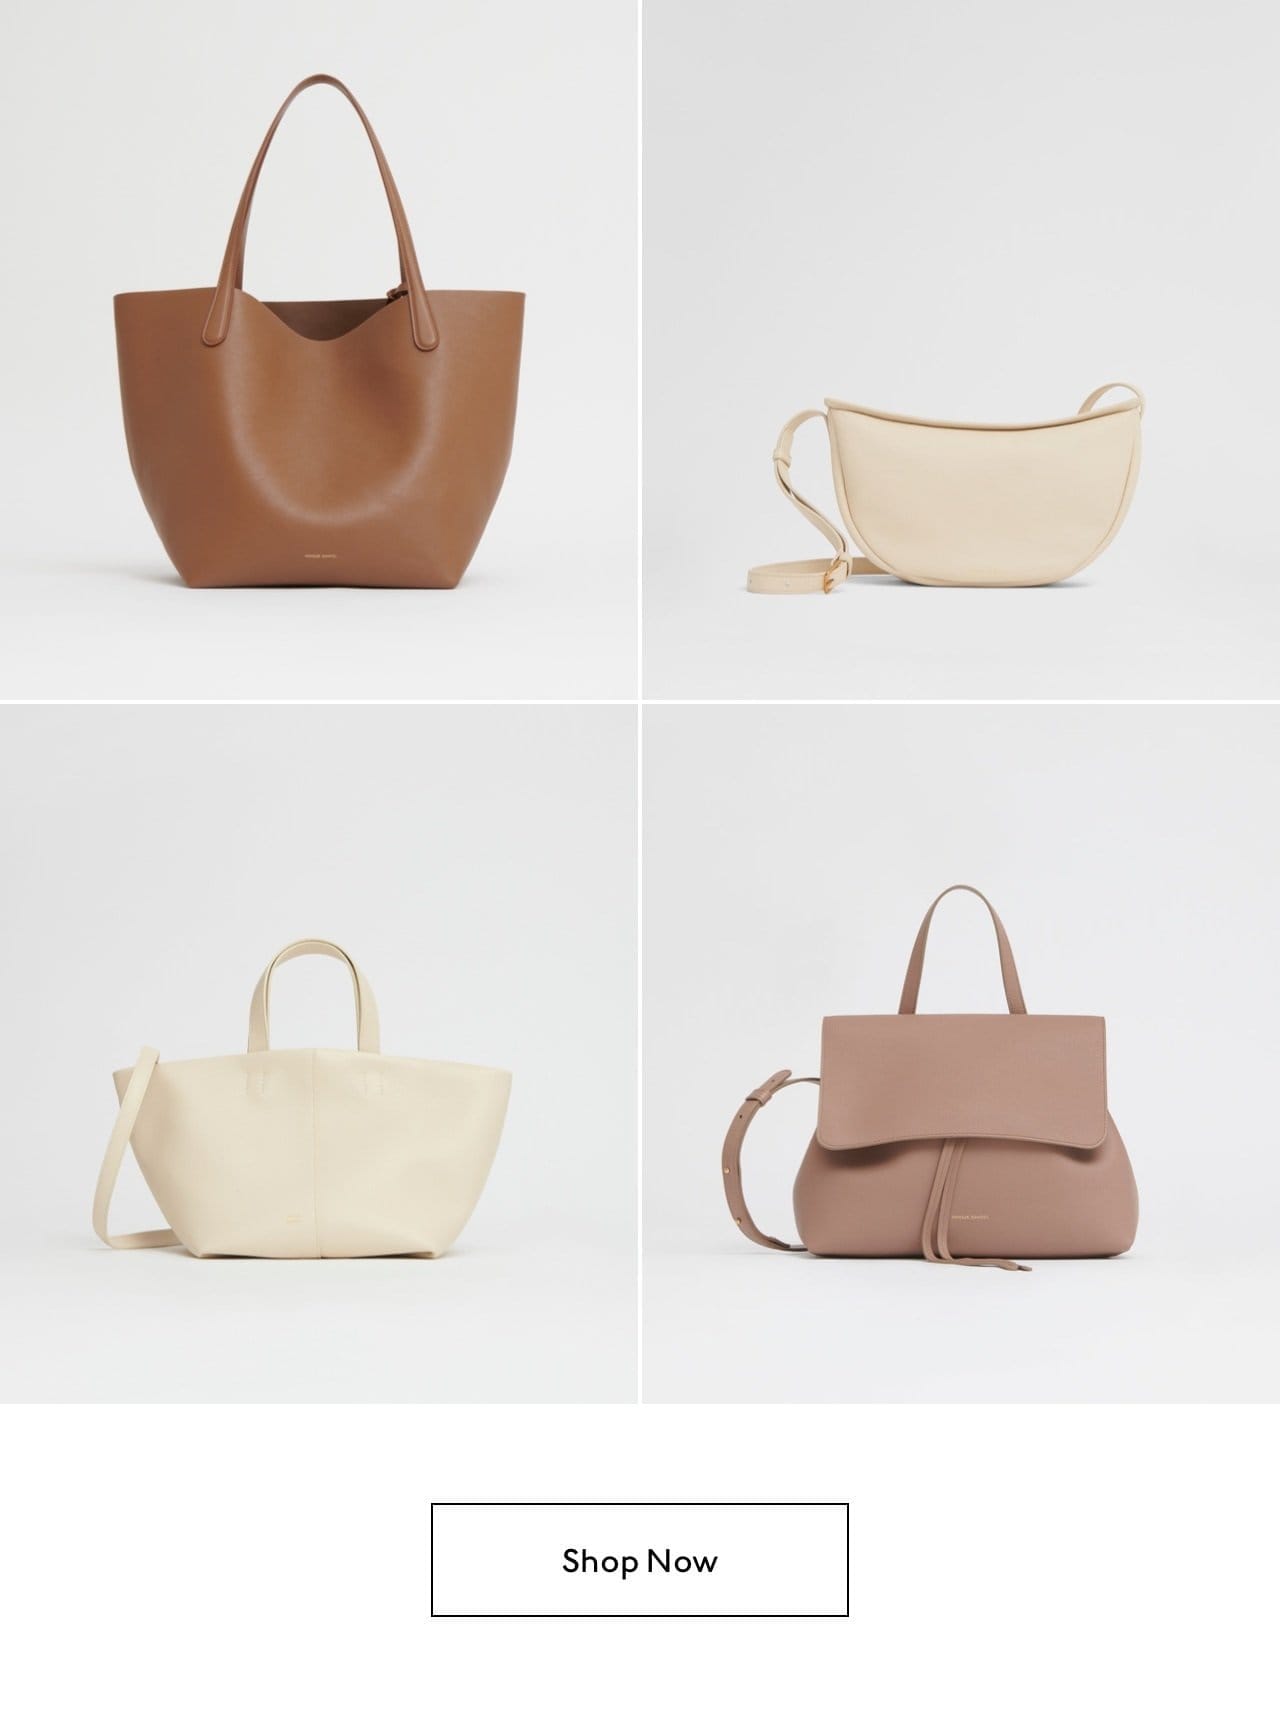 Shop totes, crossbody bags, top handle bags and more.